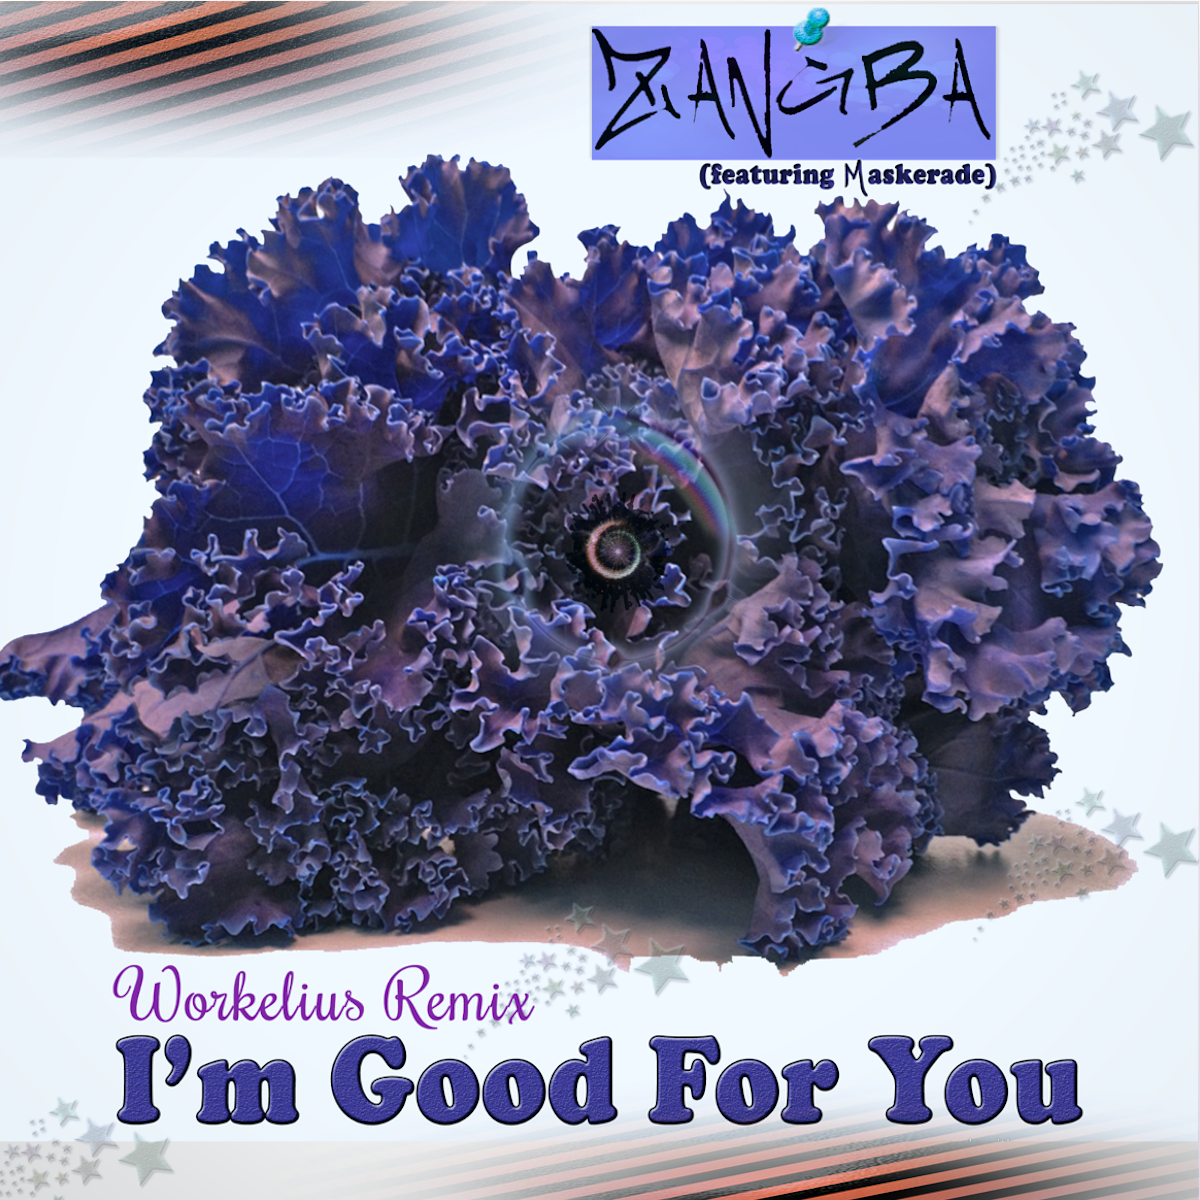 ZANGBA + "I'm Good For You (Workelius Remix)" cover